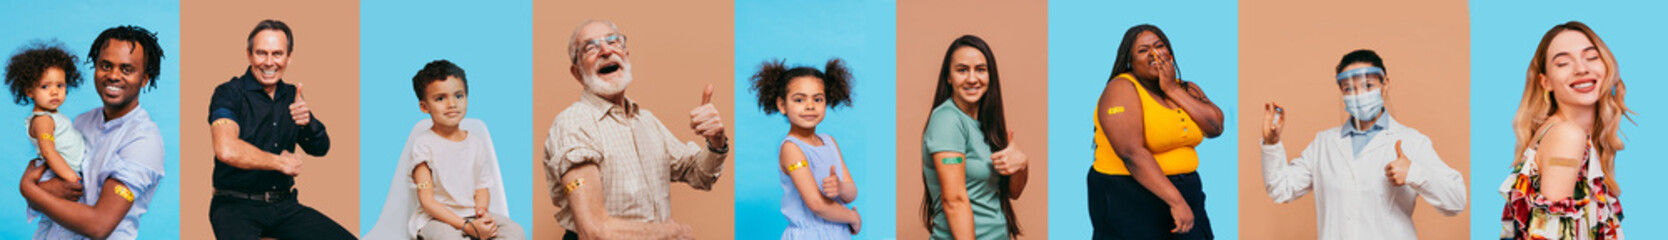 Coronavirus vaccination campaign banner, several portraits of diverse people getting vaccinated...